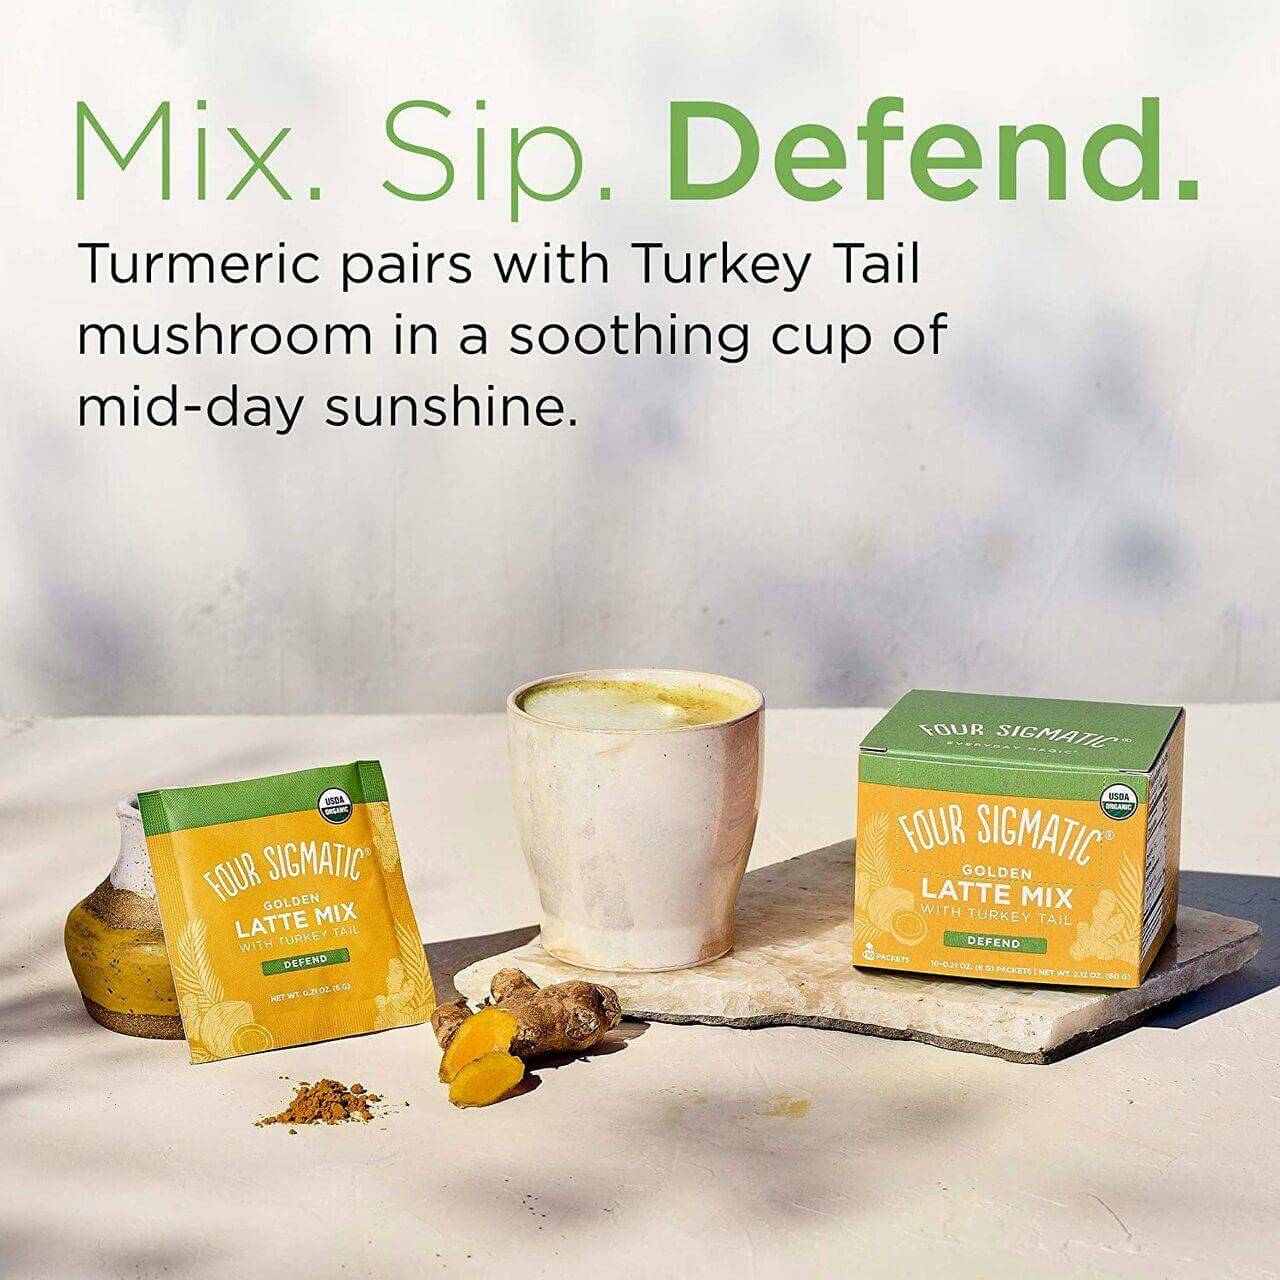 Four Sigmatic Golden Latte Mix with Turkey Tail and Turmeric 10 X 6 g sachets 60 Grams - Nutrition Plus